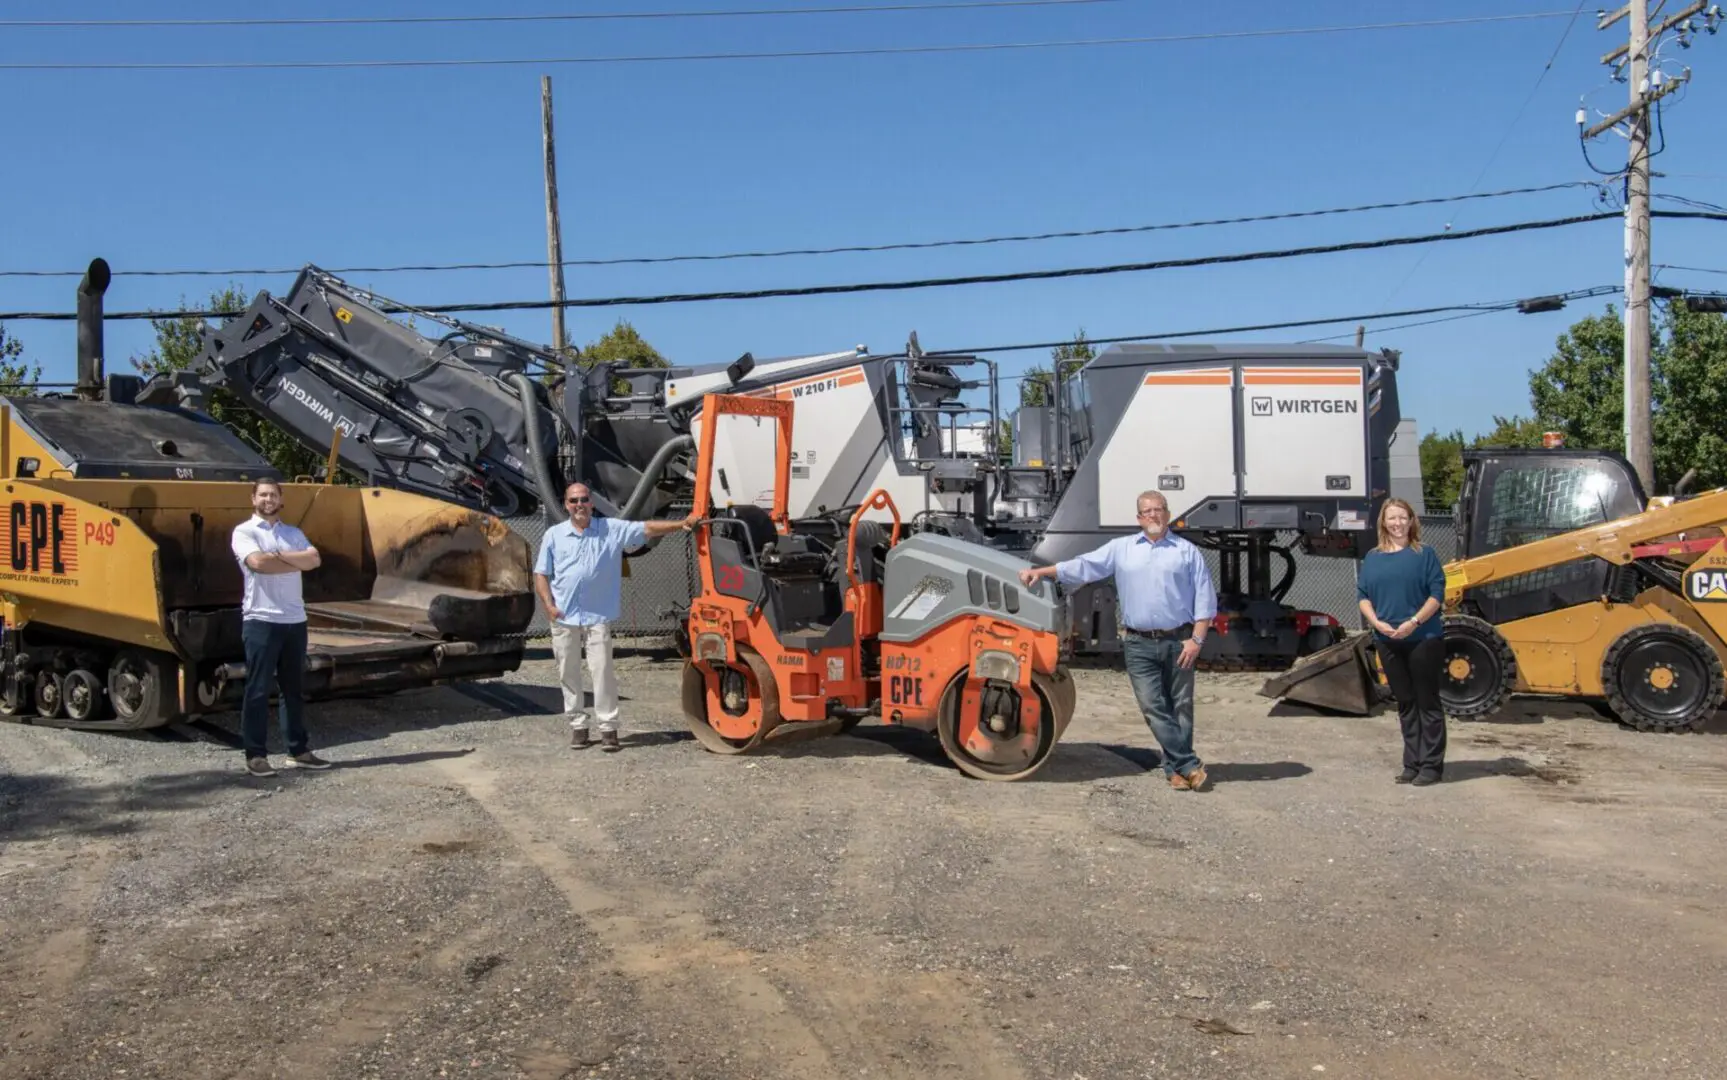 Three men standing next to a small construction vehicle.